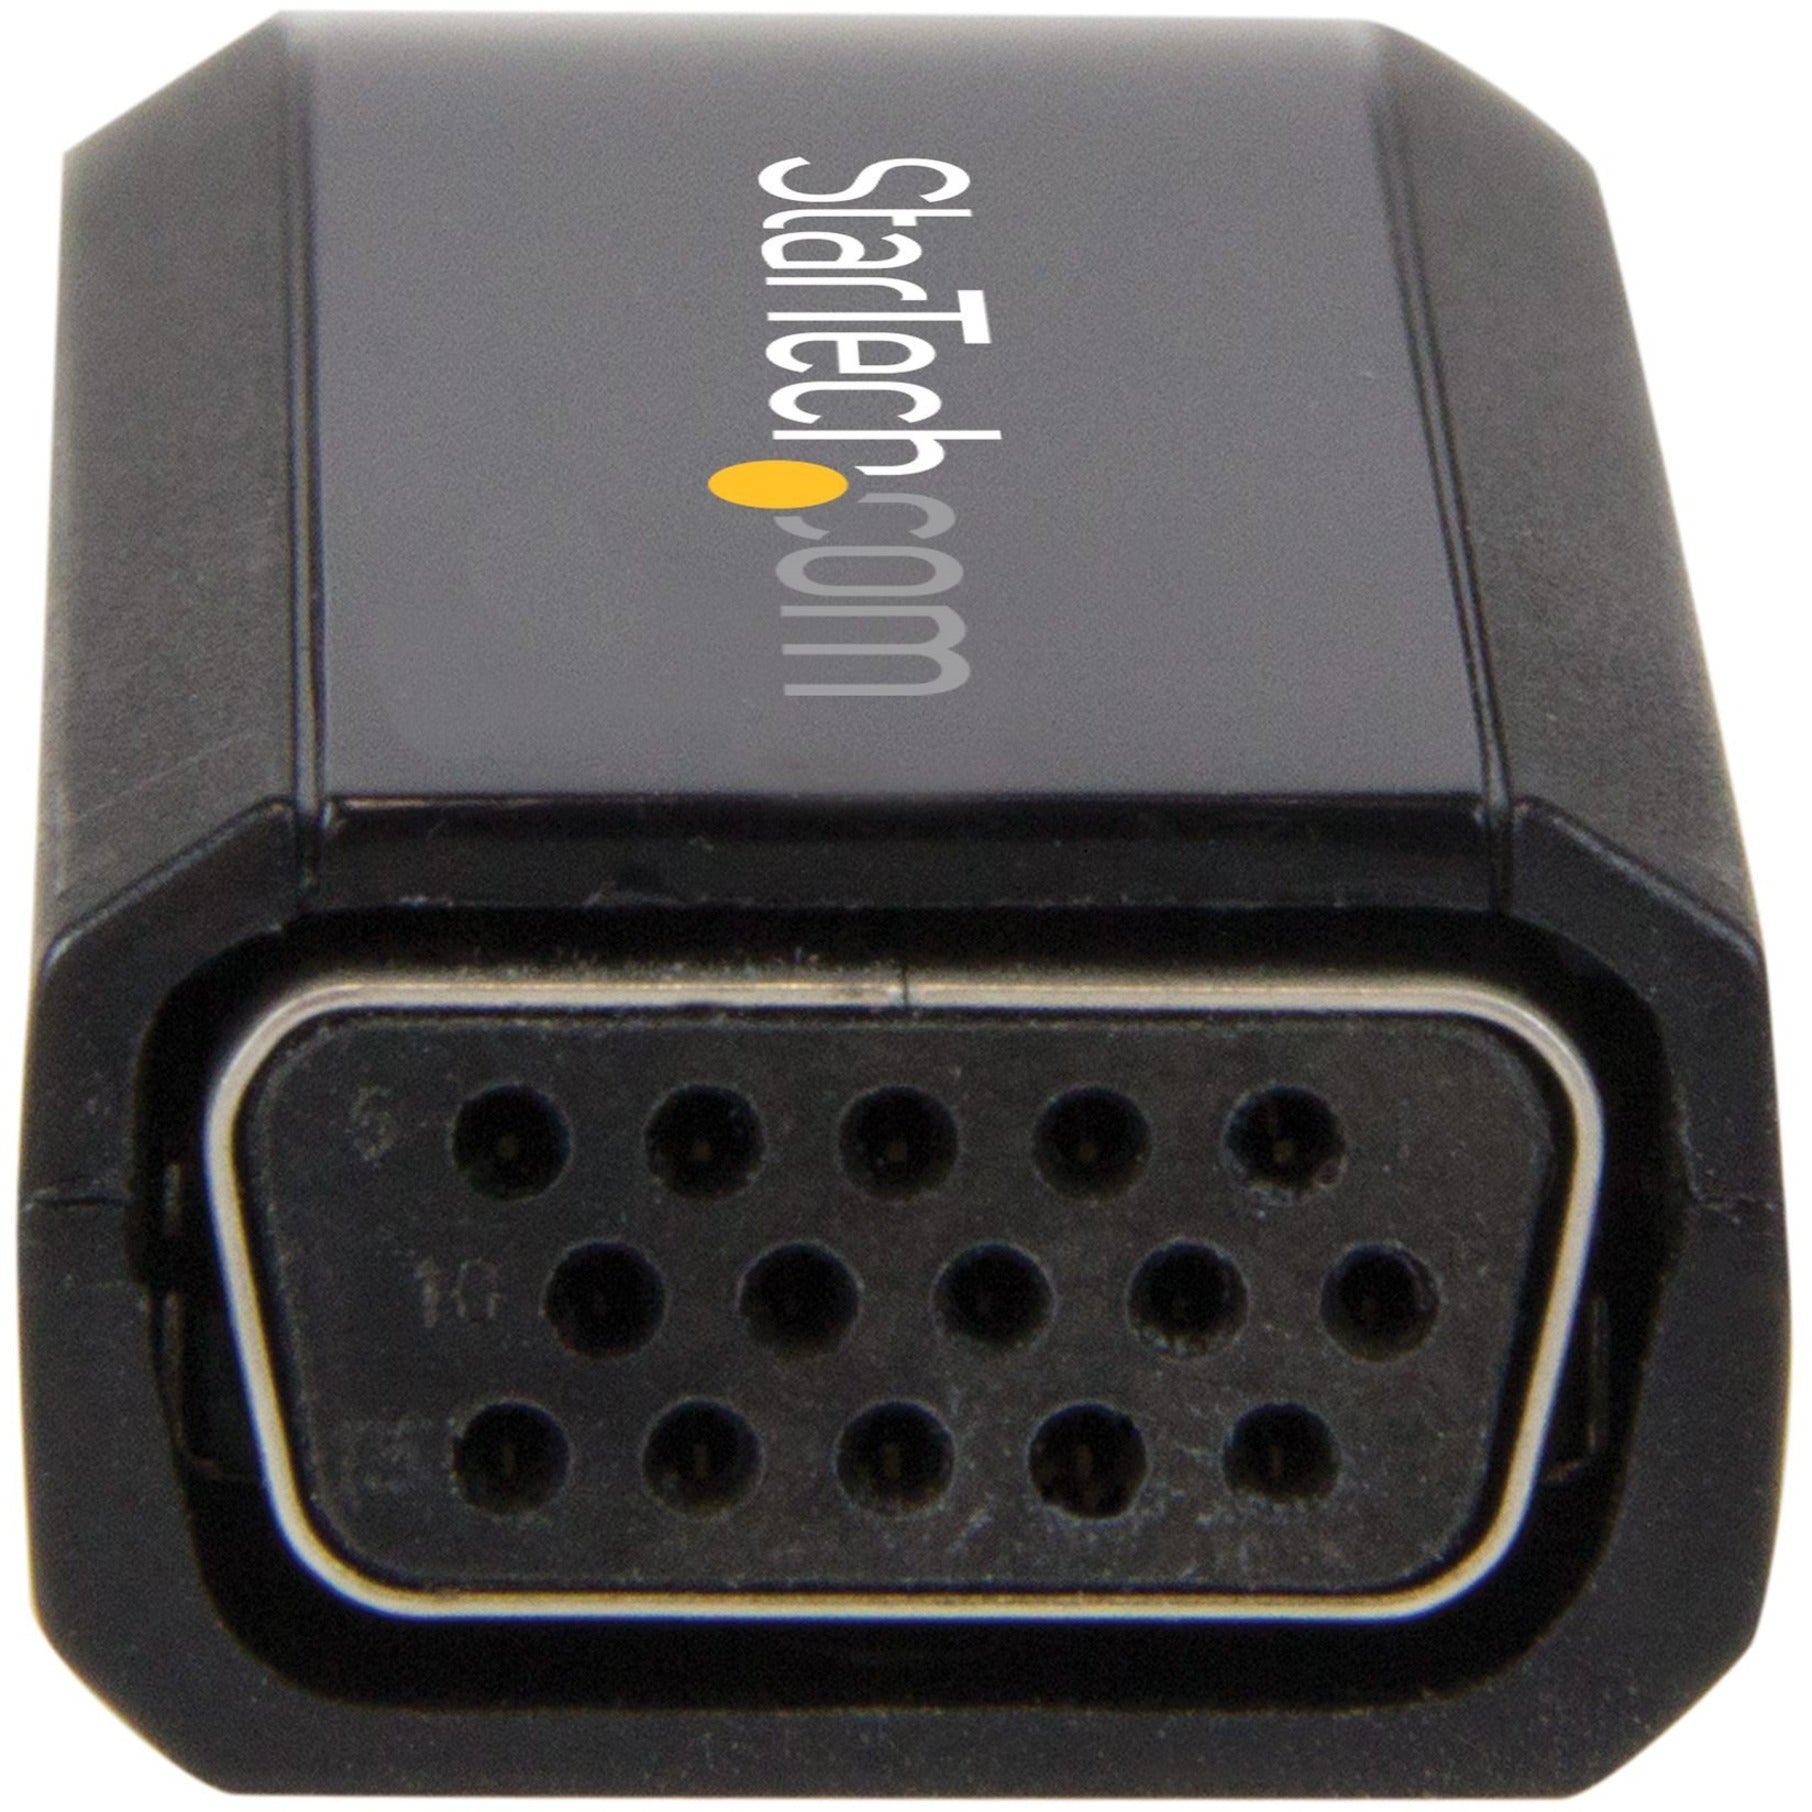 StarTech.com HD2VGAMICRA HDMI to VGA Converter with Audio - Compact Adapter - 1920x1200, Plug and Play, Black